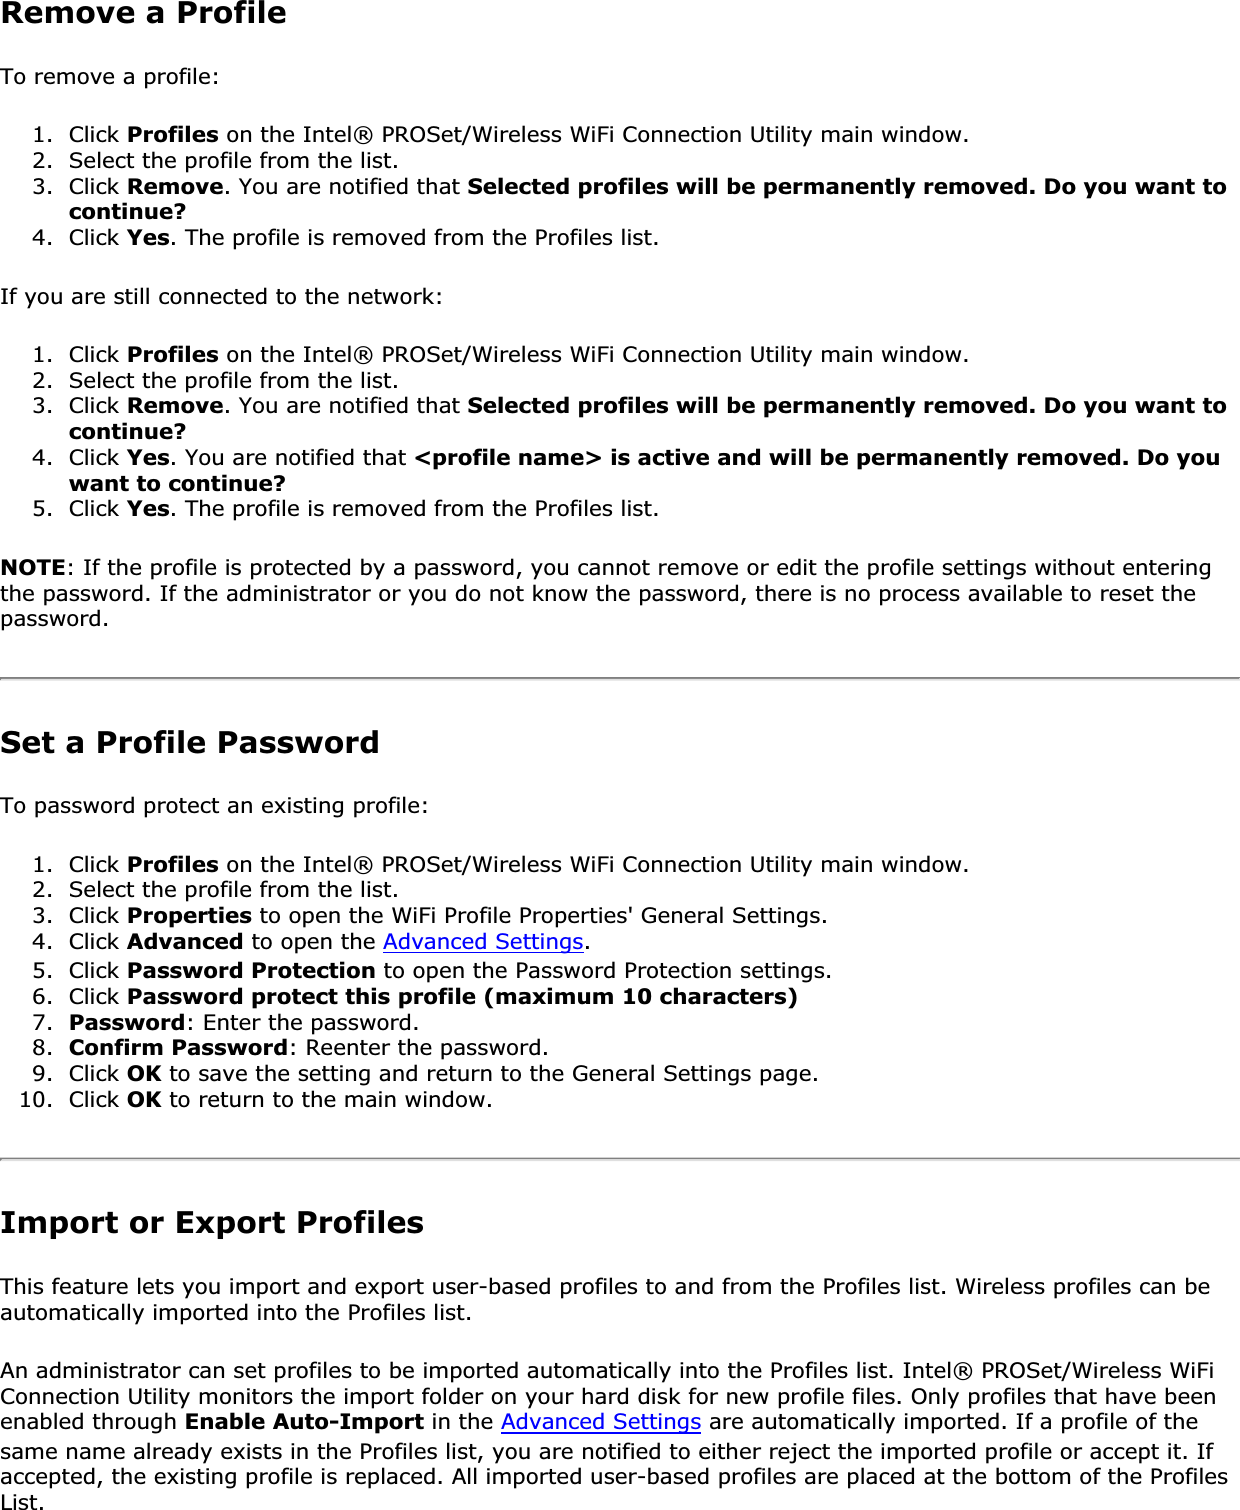 Remove a ProfileTo remove a profile: 1. Click Profiles on the Intel® PROSet/Wireless WiFi Connection Utility main window.2. Select the profile from the list.3. Click Remove. You are notified that Selected profiles will be permanently removed. Do you want to continue?4. Click Yes. The profile is removed from the Profiles list.If you are still connected to the network:1. Click Profiles on the Intel® PROSet/Wireless WiFi Connection Utility main window.2. Select the profile from the list.3. Click Remove. You are notified that Selected profiles will be permanently removed. Do you want to continue?4. Click Yes. You are notified that &lt;profile name&gt; is active and will be permanently removed. Do you want to continue?5. Click Yes. The profile is removed from the Profiles list.NOTE: If the profile is protected by a password, you cannot remove or edit the profile settings without entering the password. If the administrator or you do not know the password, there is no process available to reset the password.Set a Profile PasswordTo password protect an existing profile:1. Click Profiles on the Intel® PROSet/Wireless WiFi Connection Utility main window.2. Select the profile from the list.3. Click Properties to open the WiFi Profile Properties&apos; General Settings.4. Click Advanced to open the Advanced Settings.5. Click Password Protection to open the Password Protection settings.6. Click Password protect this profile (maximum 10 characters)7. Password: Enter the password.8. Confirm Password: Reenter the password.9. Click OK to save the setting and return to the General Settings page.10. Click OK to return to the main window.Import or Export ProfilesThis feature lets you import and export user-based profiles to and from the Profiles list. Wireless profiles can be automatically imported into the Profiles list.An administrator can set profiles to be imported automatically into the Profiles list. Intel® PROSet/Wireless WiFi Connection Utility monitors the import folder on your hard disk for new profile files. Only profiles that have been enabled through Enable Auto-Import in the Advanced Settings are automatically imported. If a profile of the same name already exists in the Profiles list, you are notified to either reject the imported profile or accept it. If accepted, the existing profile is replaced. All imported user-based profiles are placed at the bottom of the Profiles List.